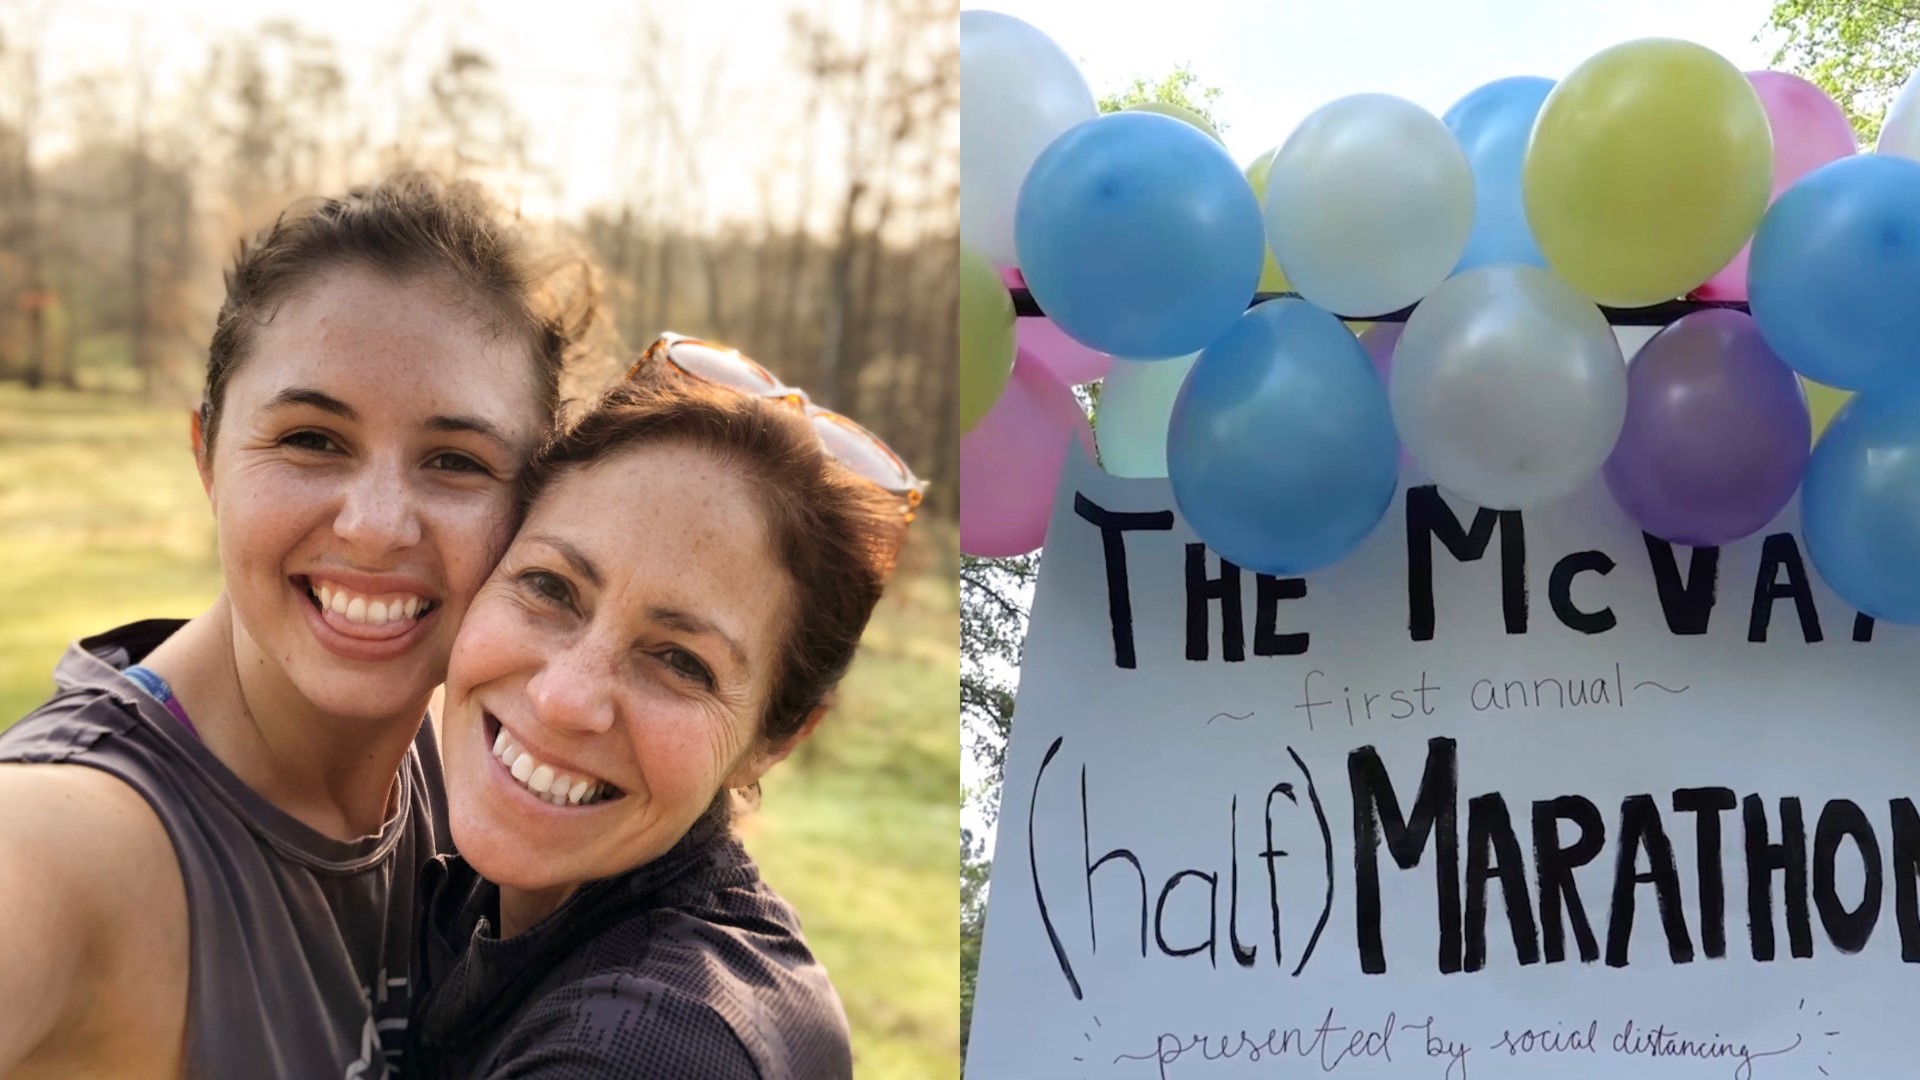 The race a mother-daughter duo panned to run in was postponed, so the daughter decided to cheer her mother up with a surprise half marathon in their own neighborhood